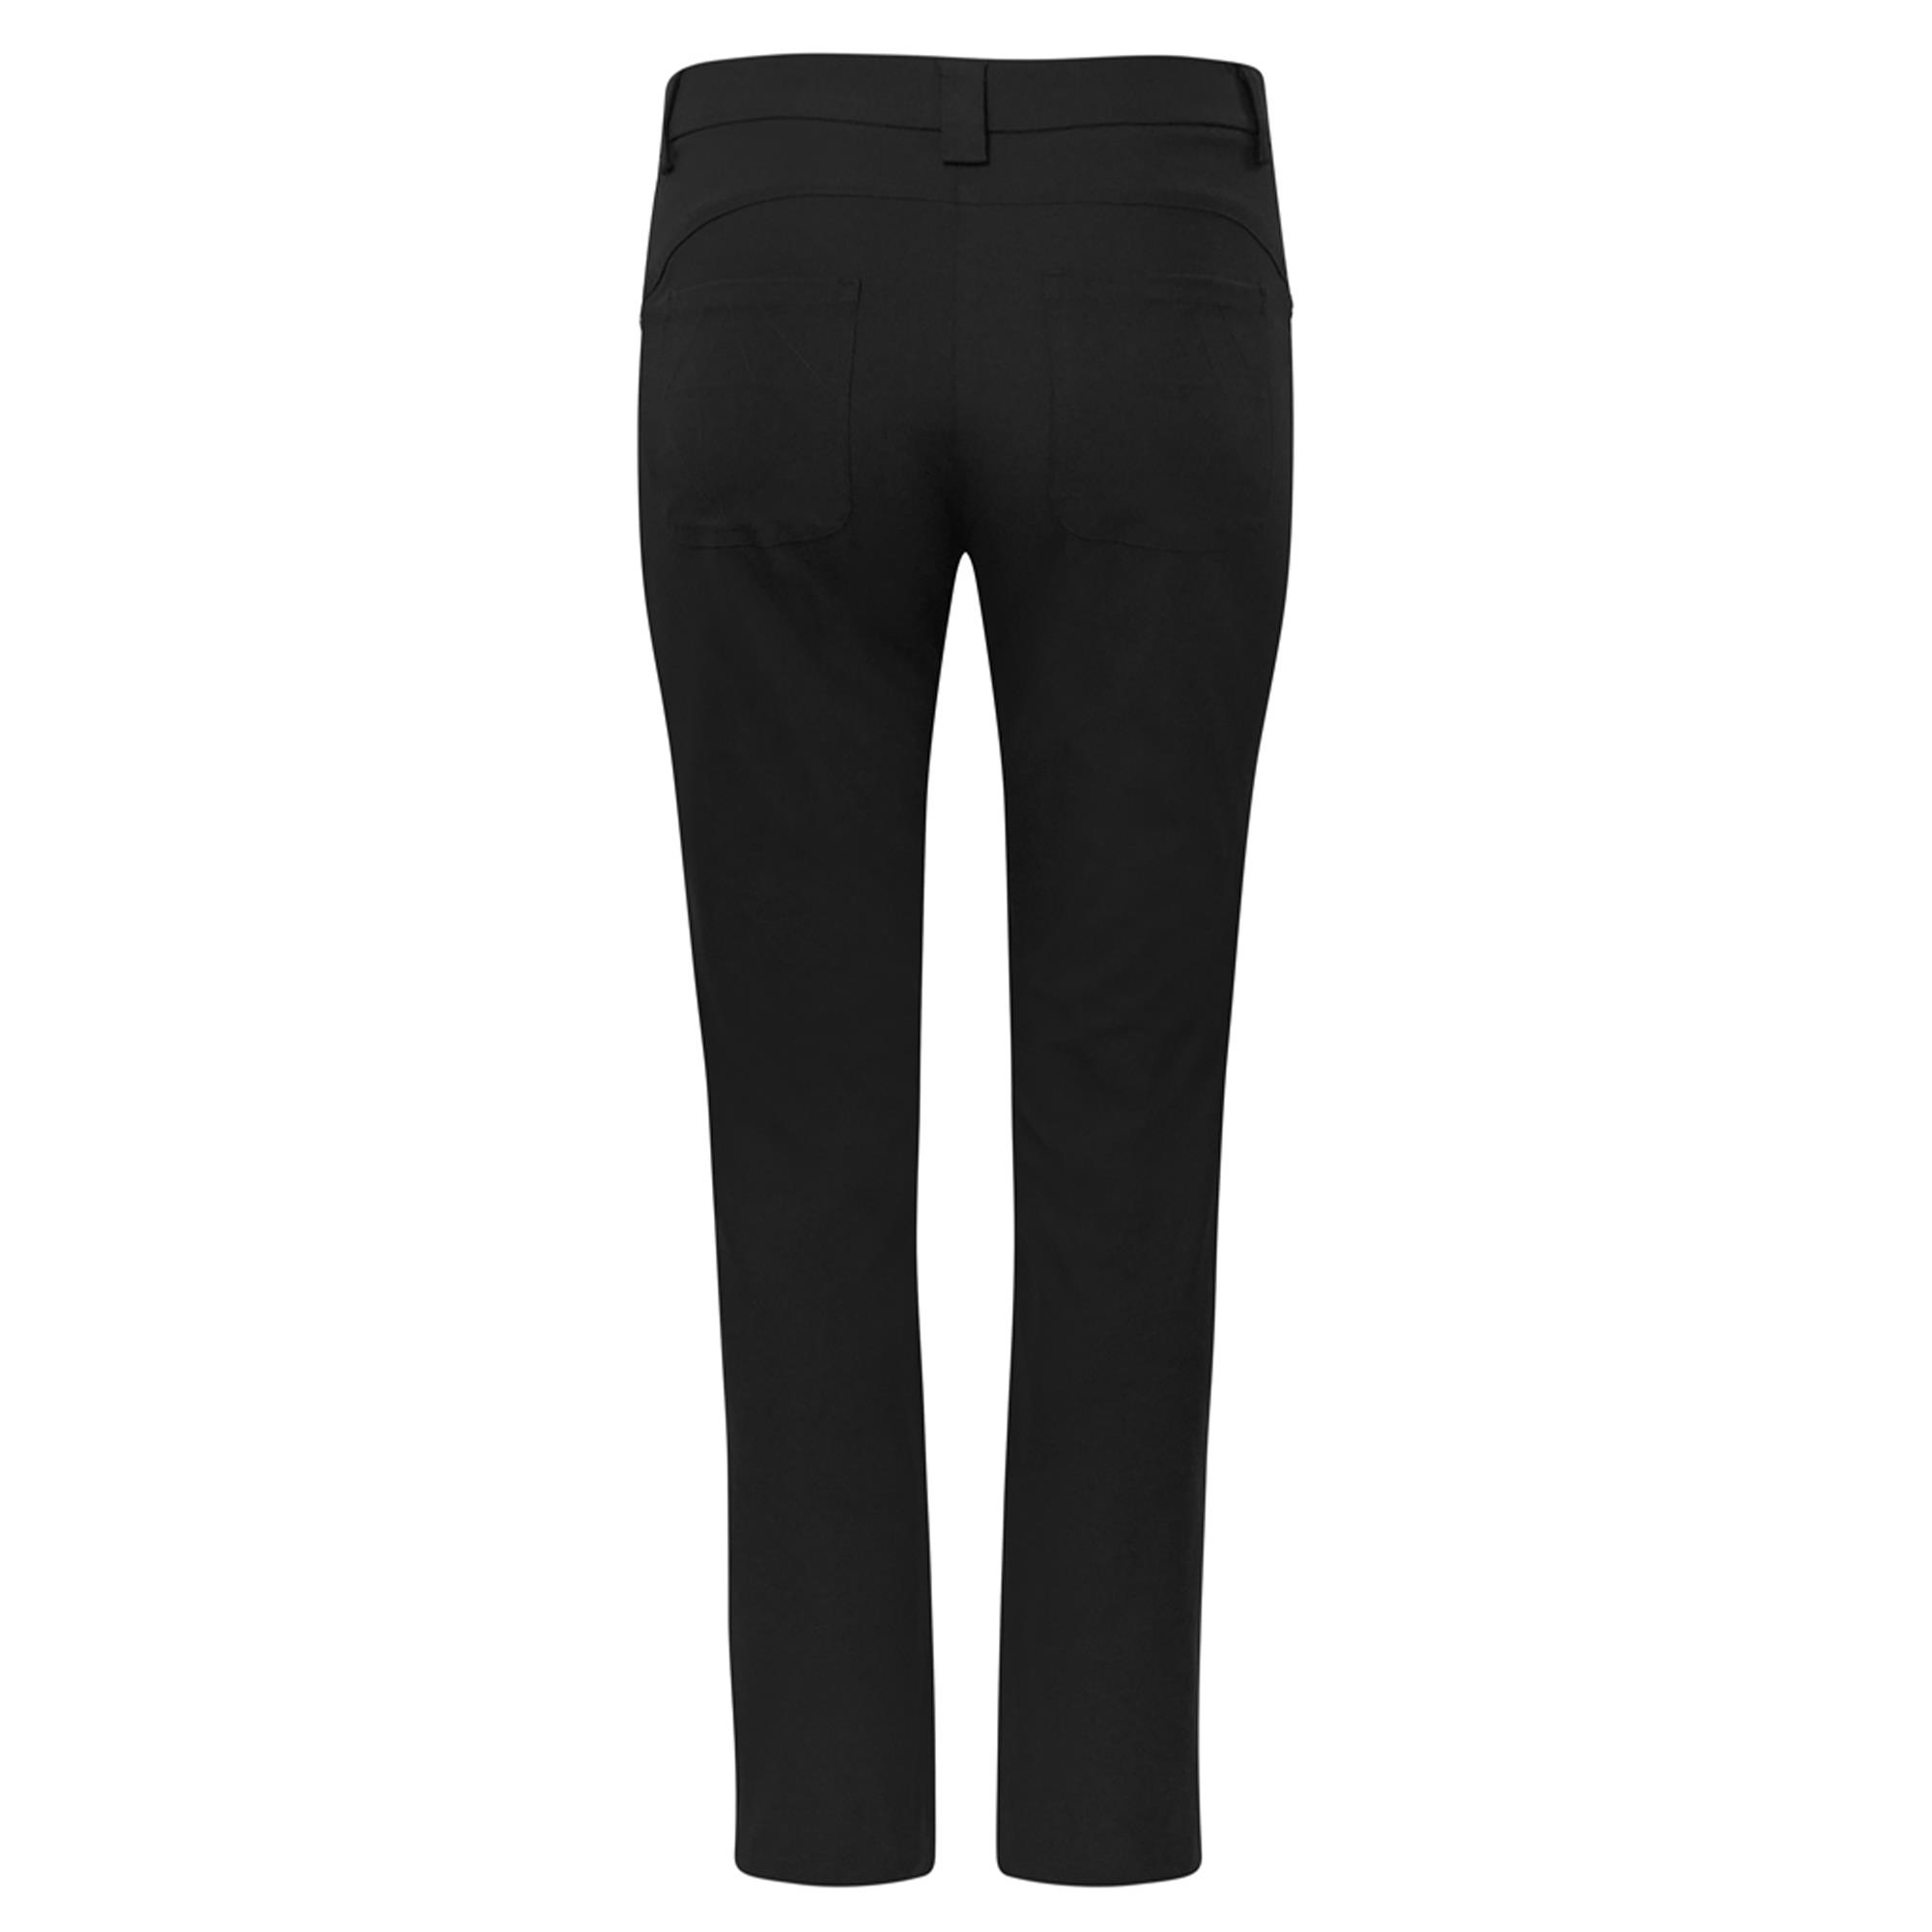 Trousers With Matching Belt Casual Formal Office Pants For Ladies - White -  Wholesale Womens Clothing Vendors For Boutiques